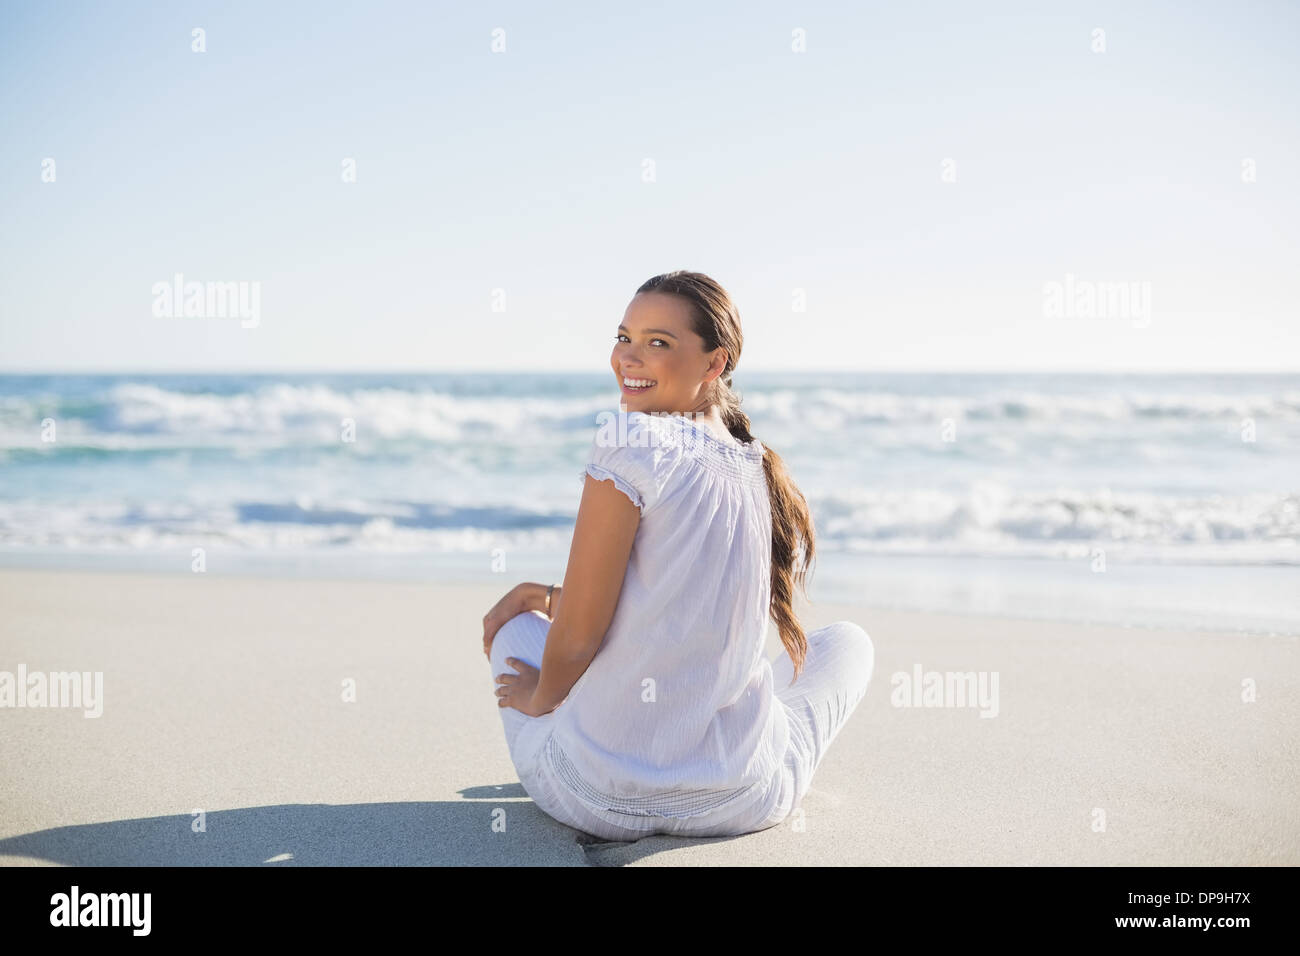 Rear view of smiling woman looking over shoulder at camera Stock Photo